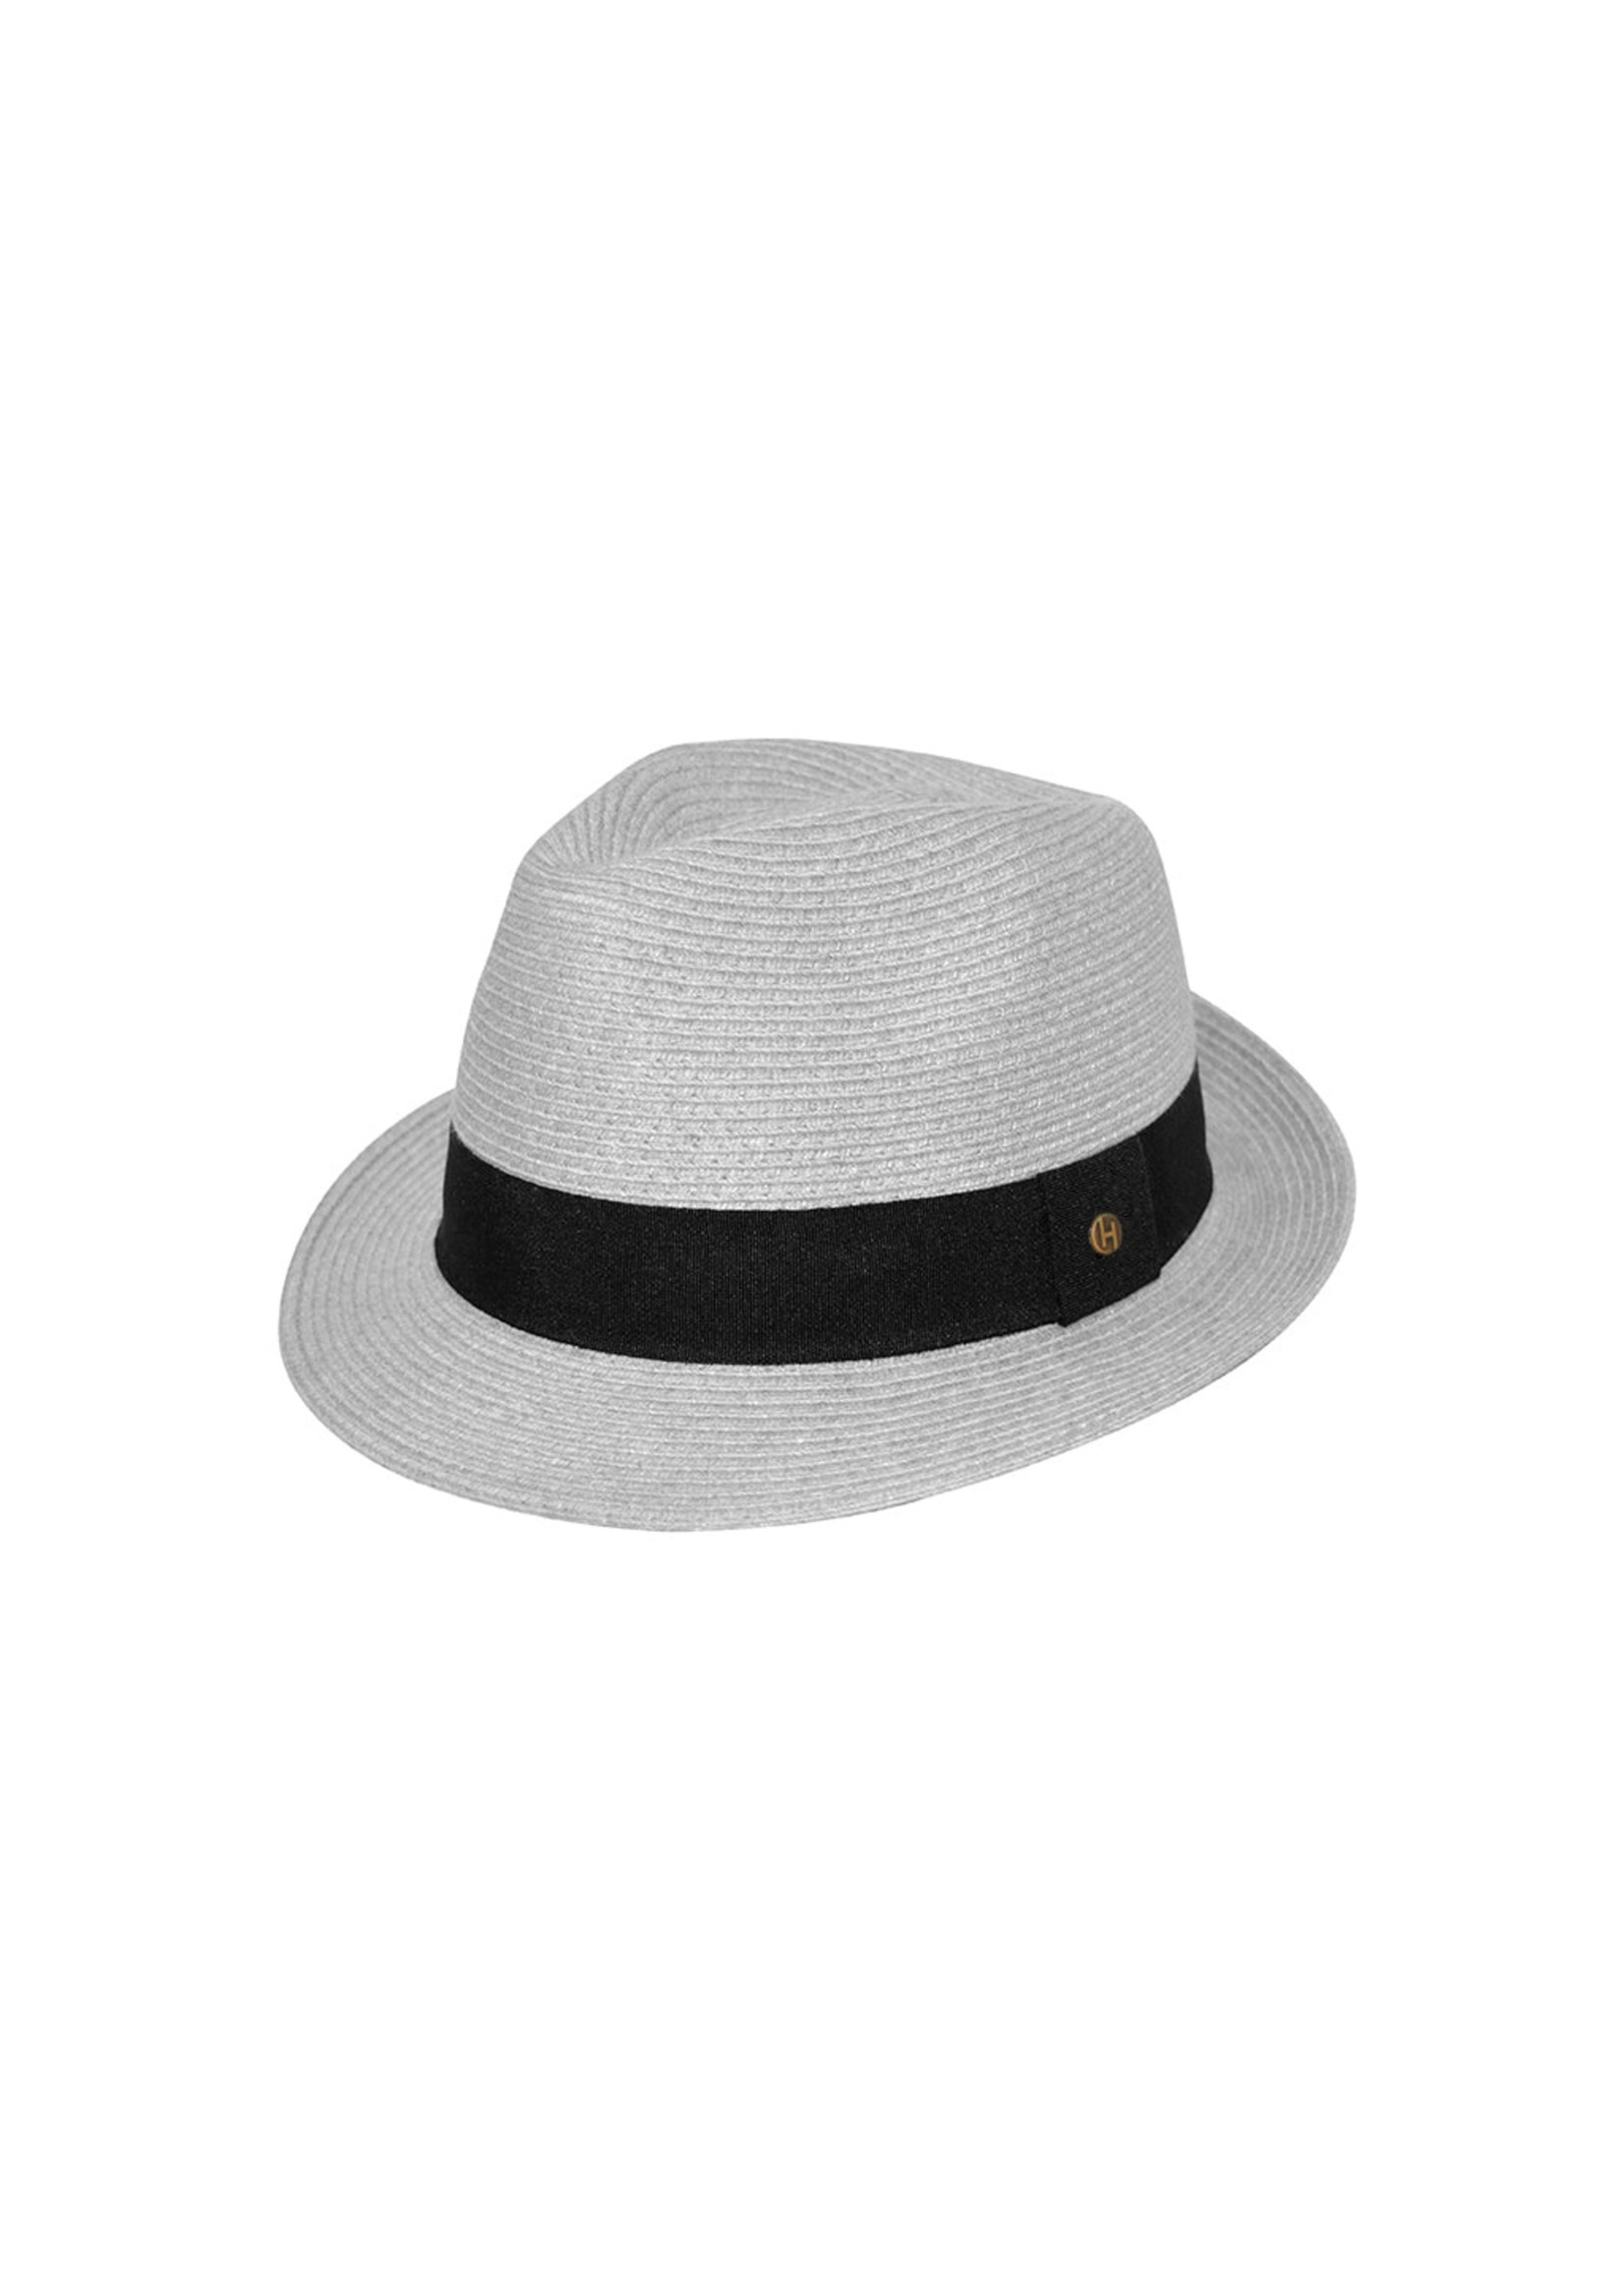 House of Ord - Cape Town Harley Trilby lichtgrijs zonnehoed